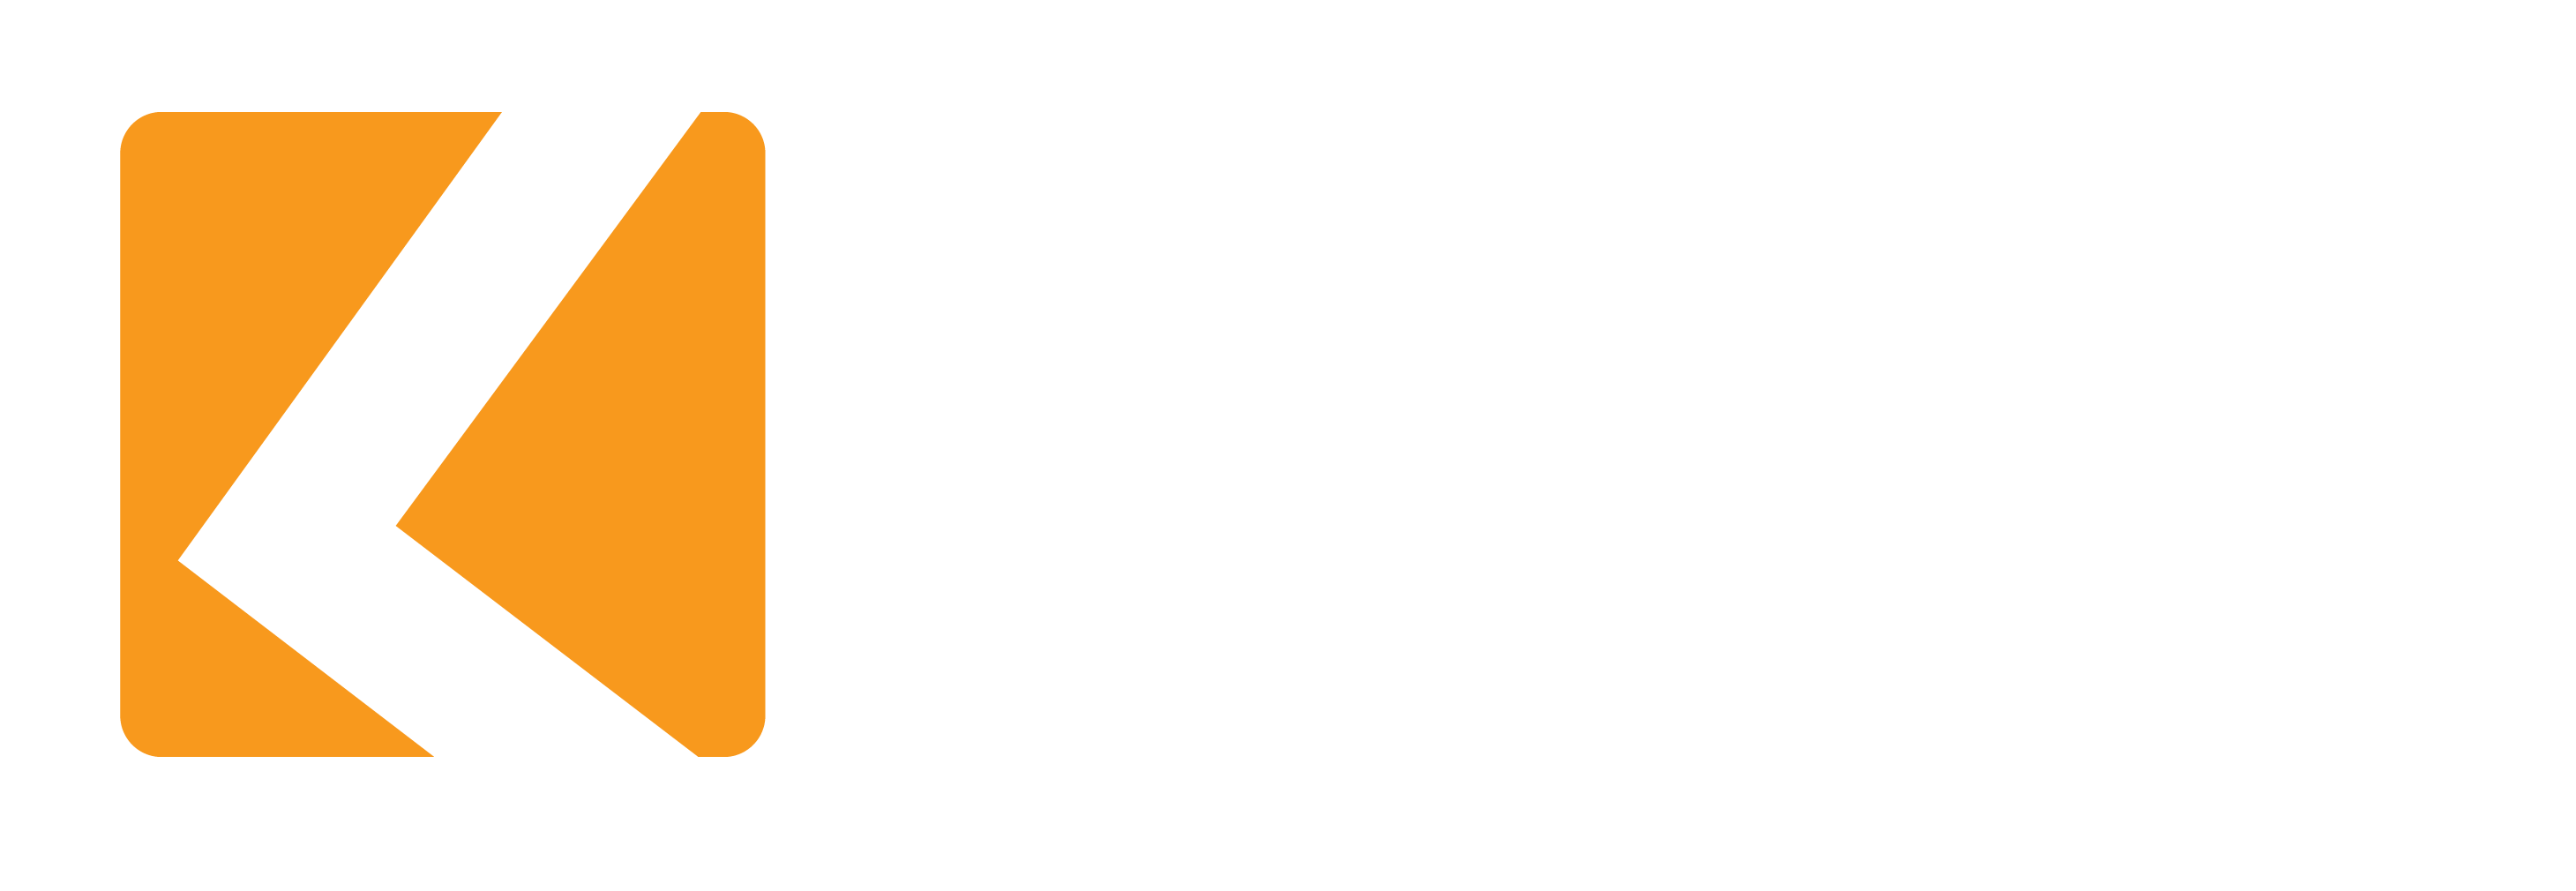 ClockWise PNG logo 2920px by 1010px